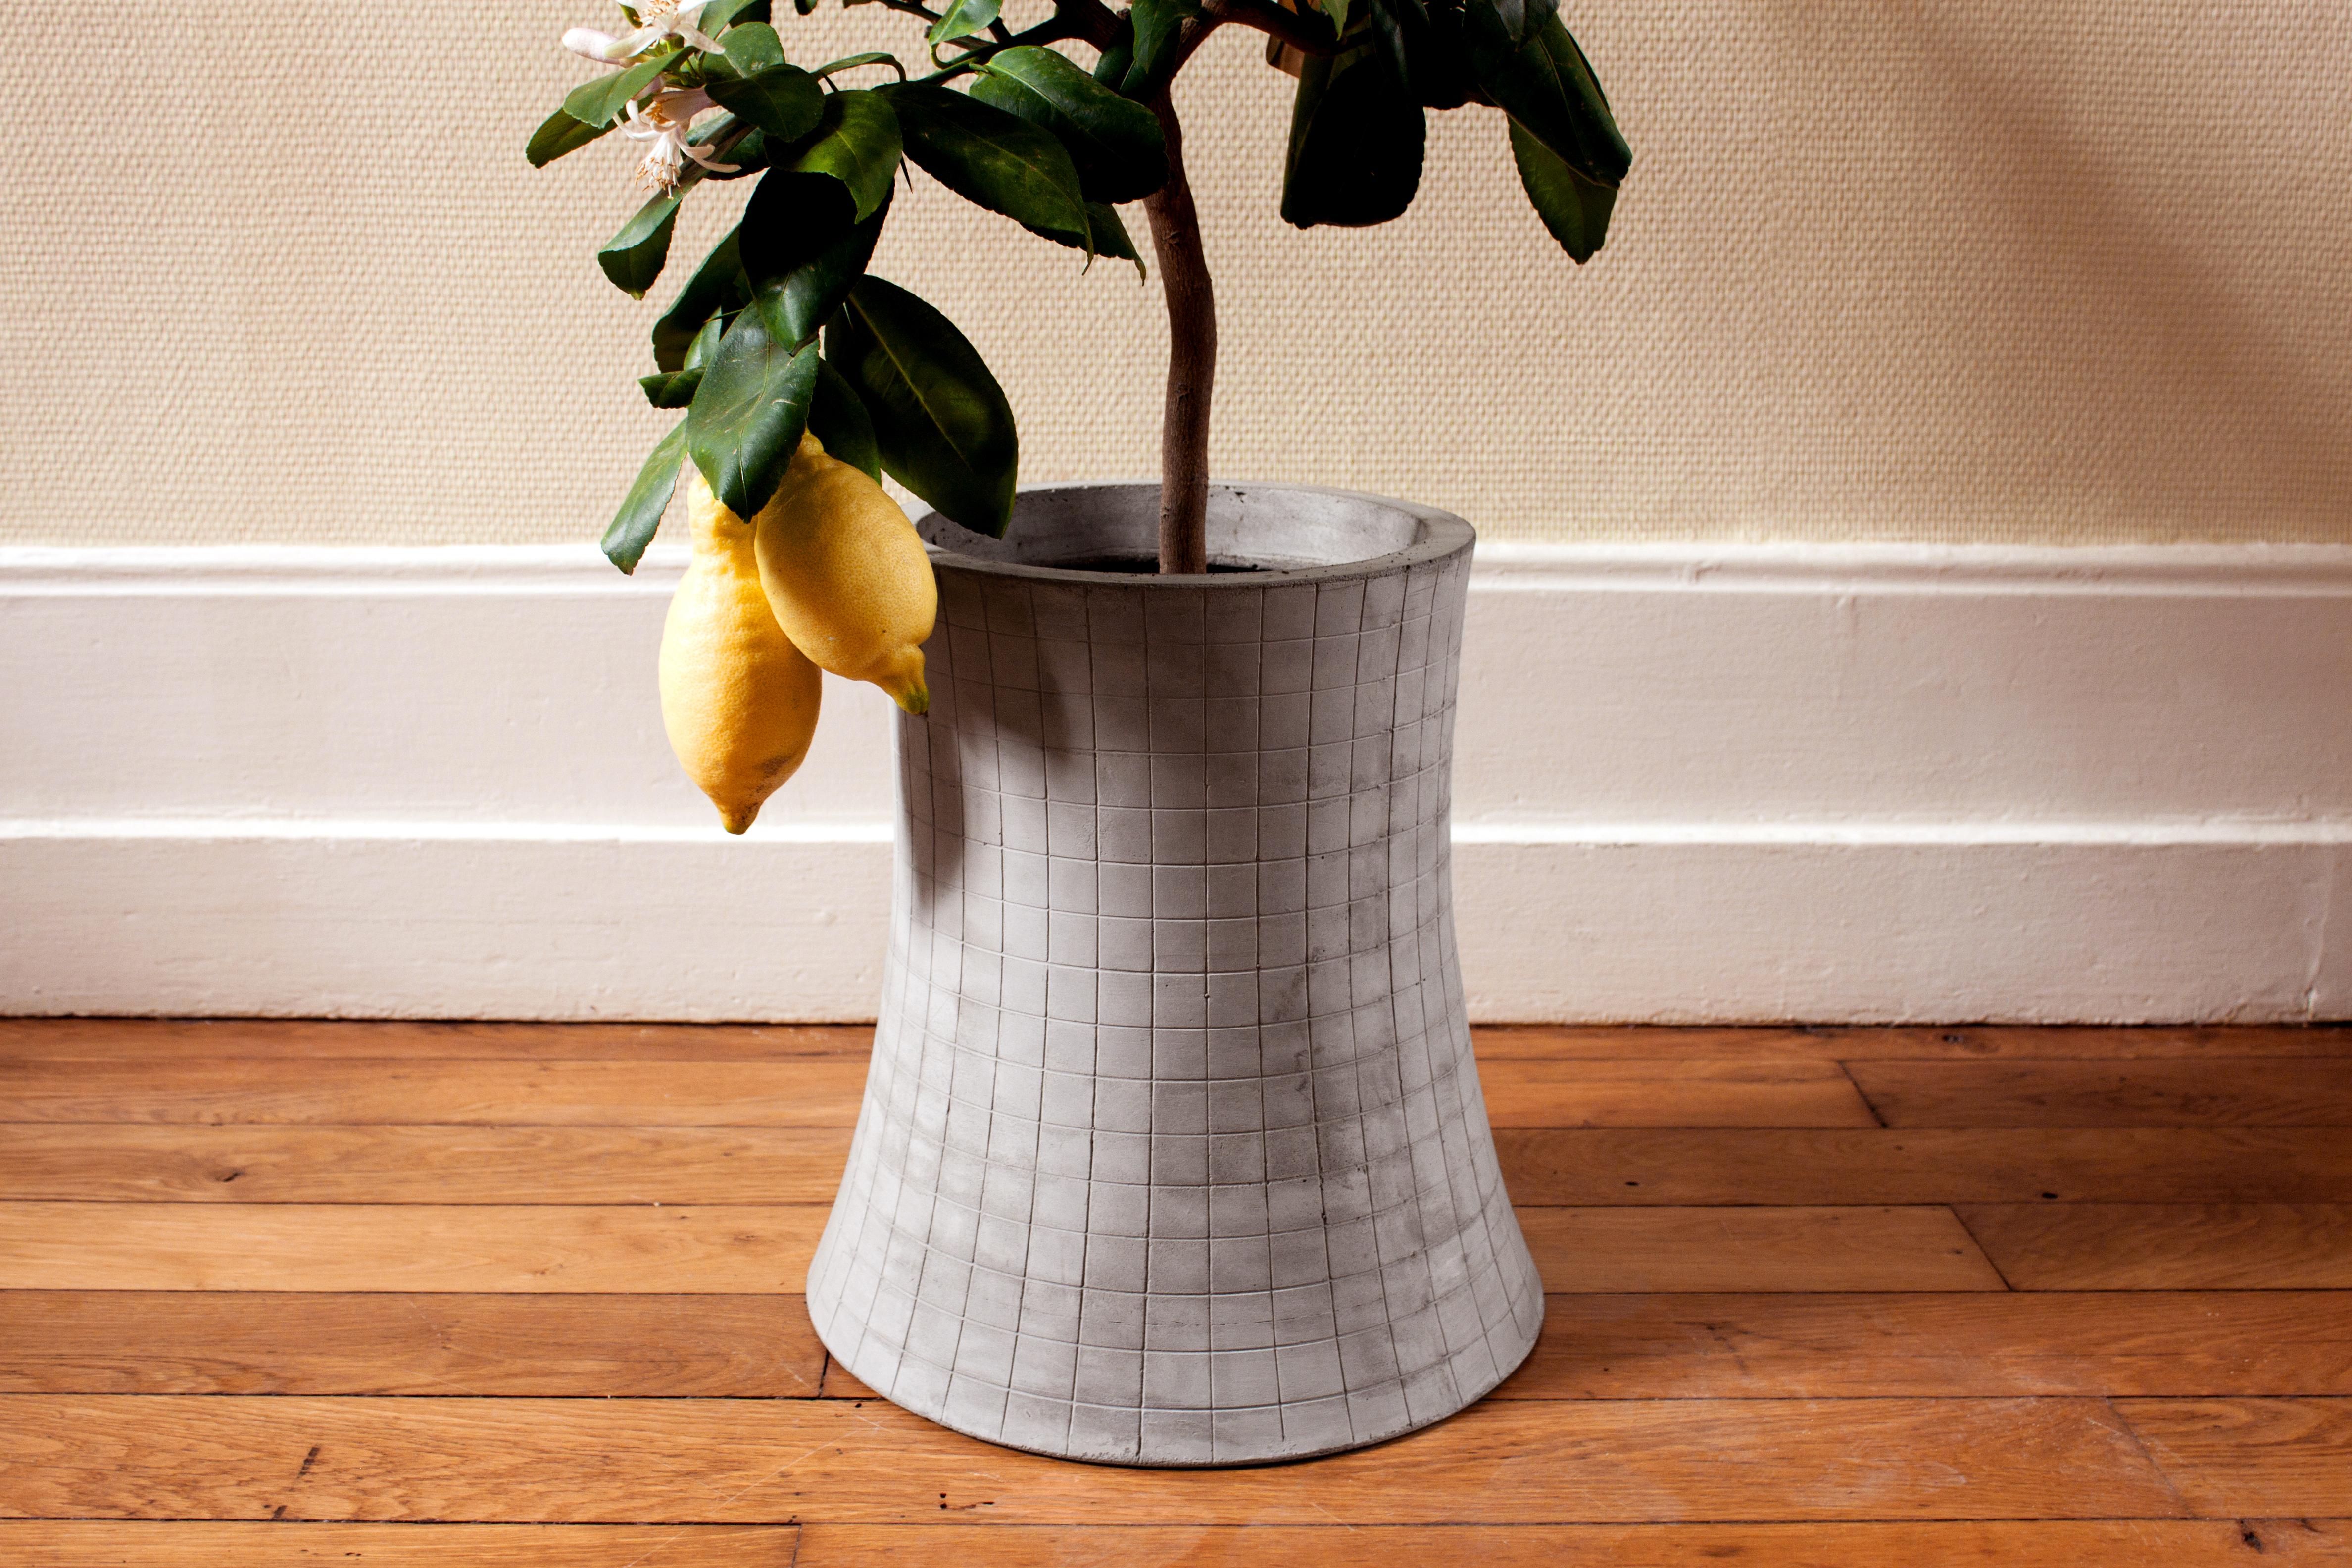 The Concrete nuclear plant holder, designed by Bertrand Jayr for Lyon Béton, is directly inspired by the cooling towers of the nuclear plants, the iconic figures of nuclear energy but with a lighthearted touch. The Nuclear Plant offers an artistic